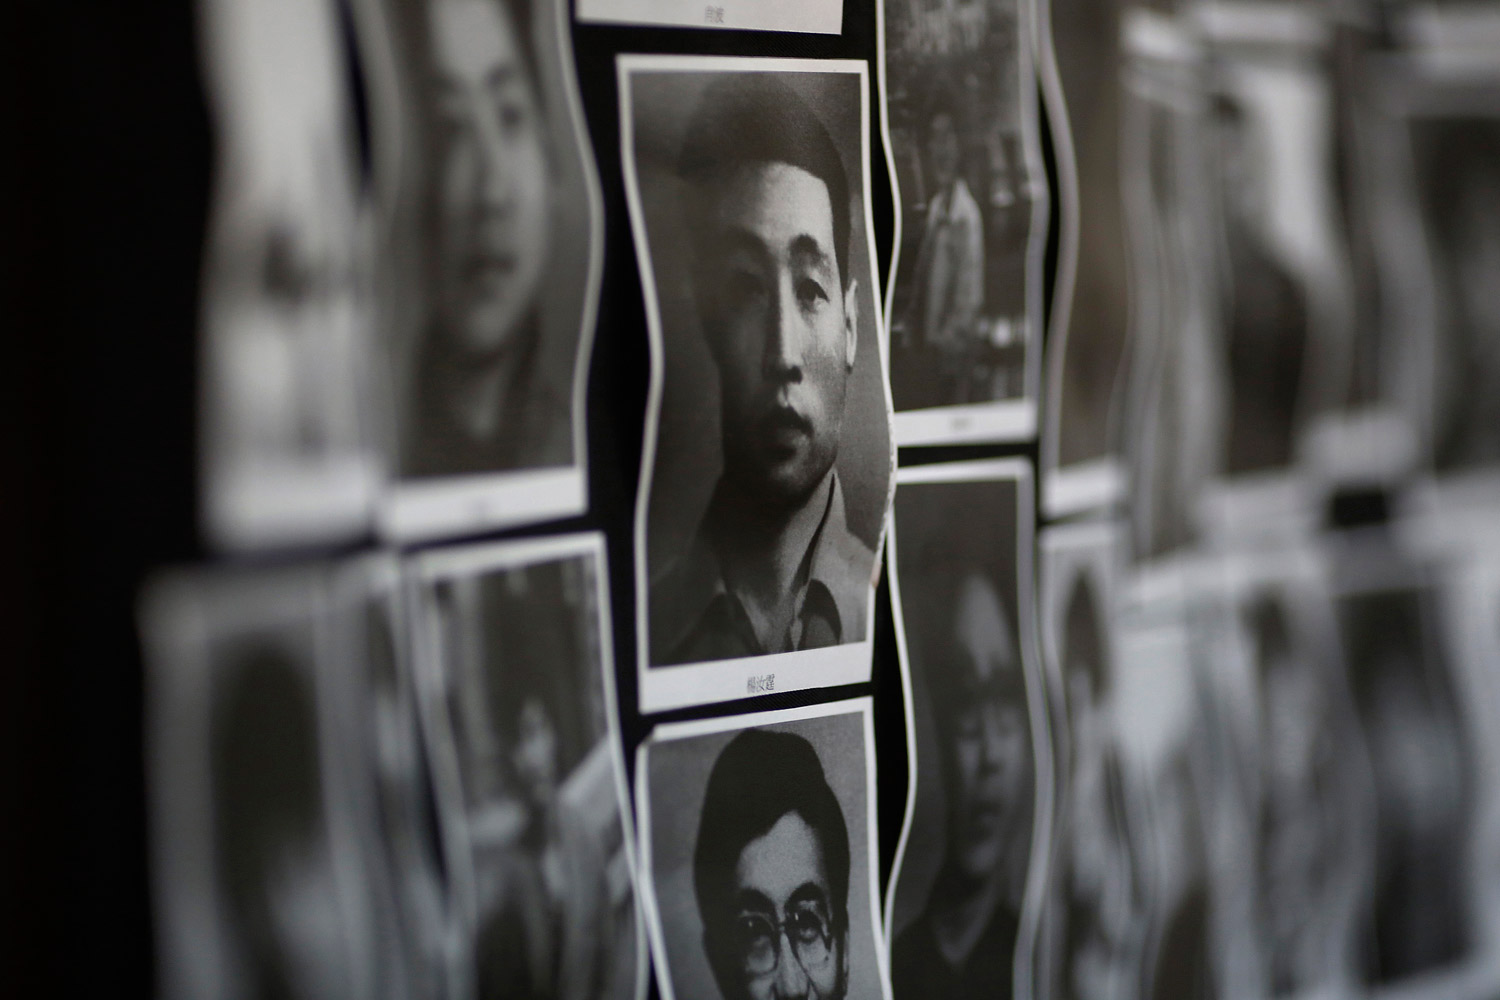 June 4, 2012. Portraits of victims of the June 4, 1989, bloodshed are displayed at the June 4 Memorial Museum in Hong Kong to commemorate the 23rd anniversary of the military crackdown on a pro-democracy student movement in Beijing's Tiananmen Square.